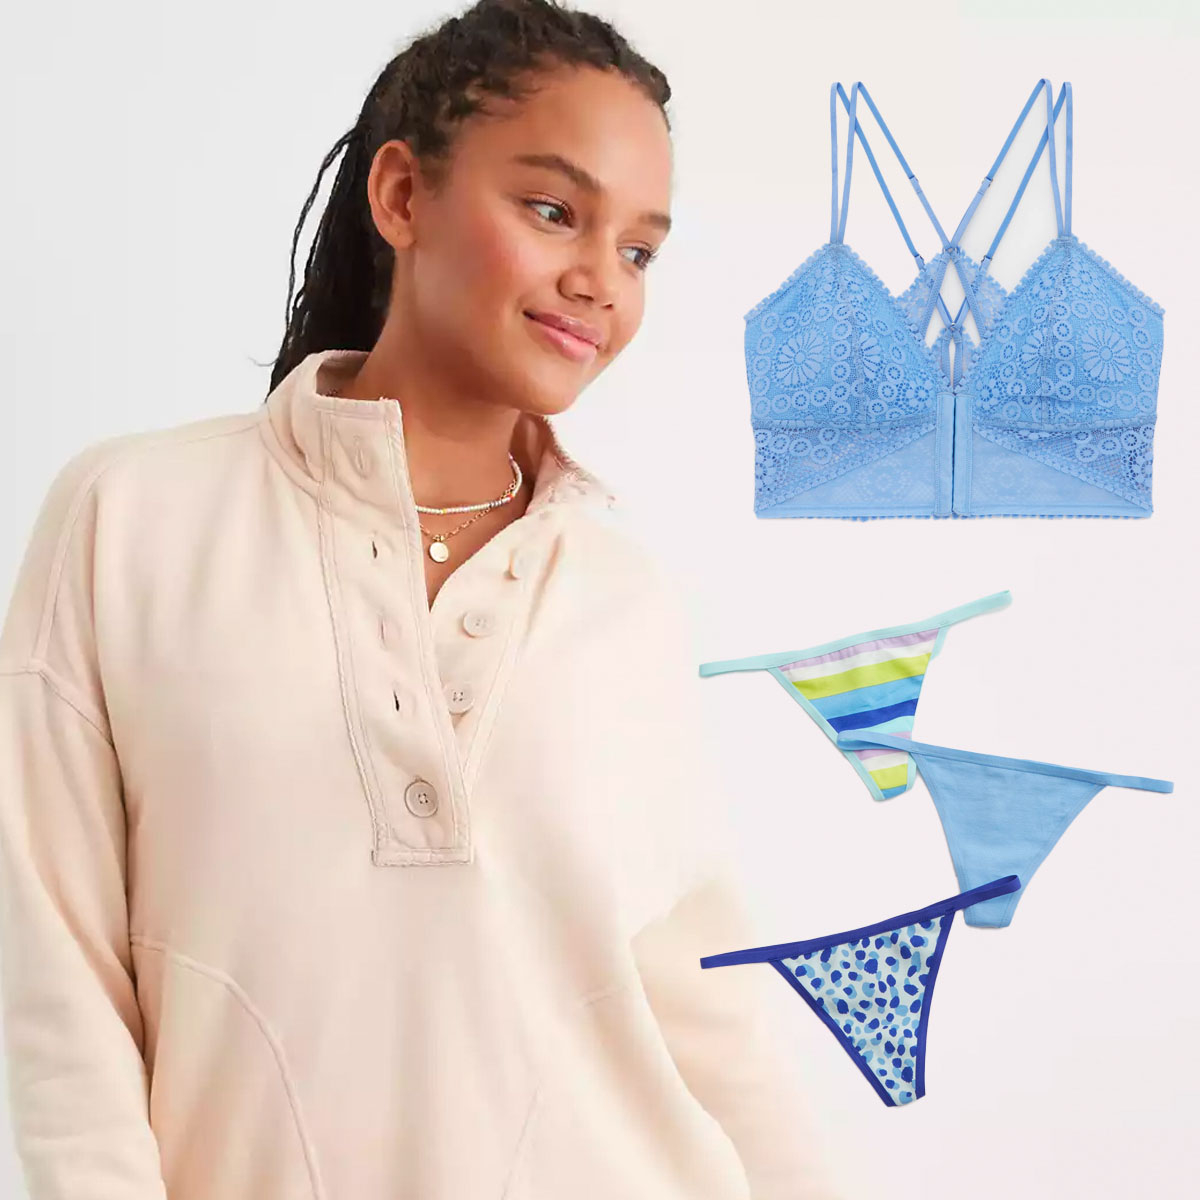 Aerie - Get to know our newest brathe Charley Plunge! Jackie, our buyer  for Aerie Pushup Bras, explains why Charley is a must-have in every bra  wardrobe this season. Tune in now